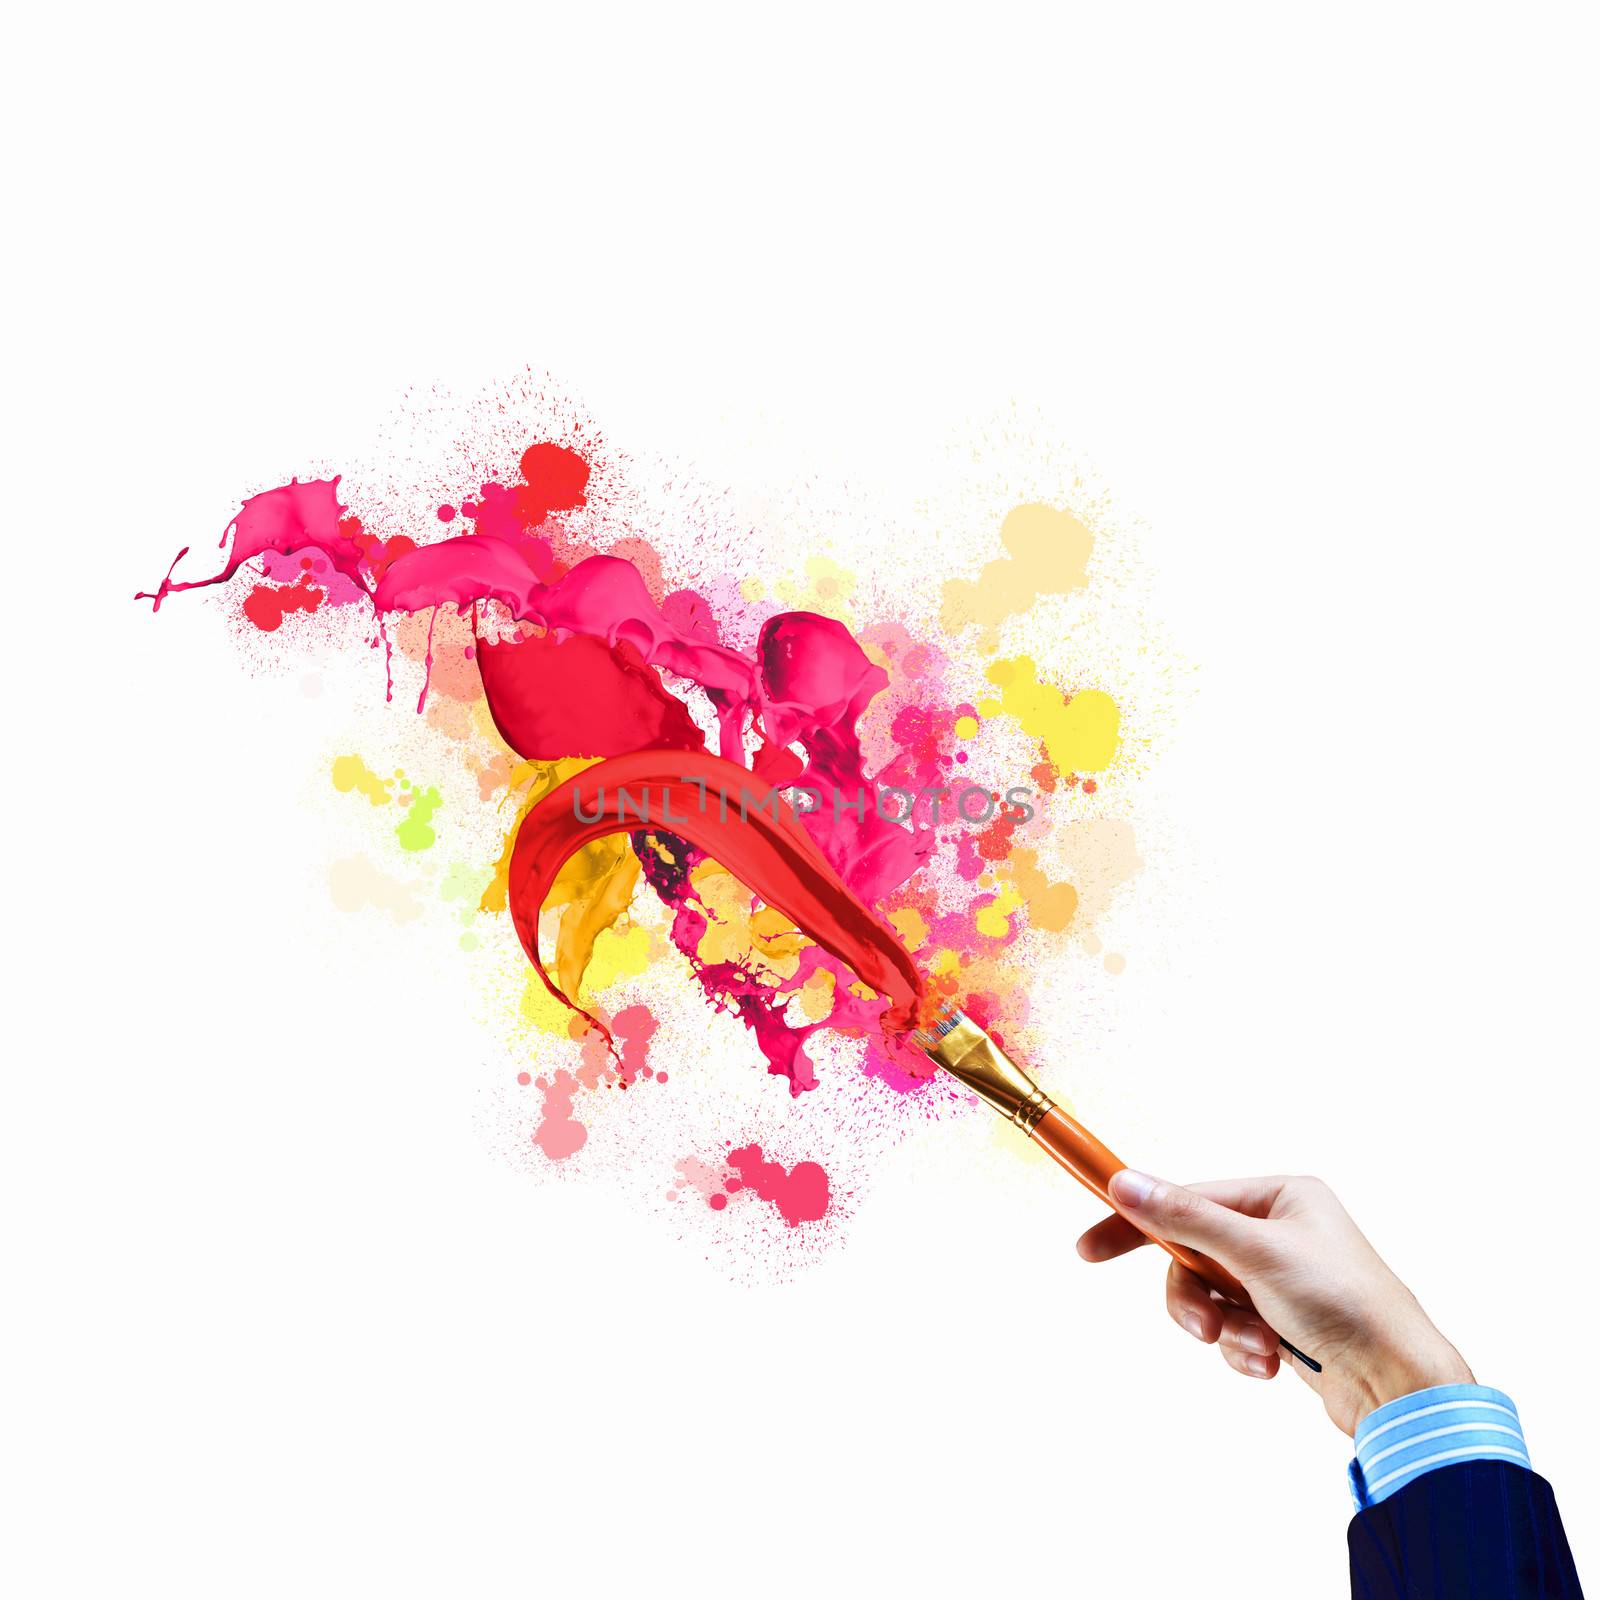 Background image with human hand holding paint brush